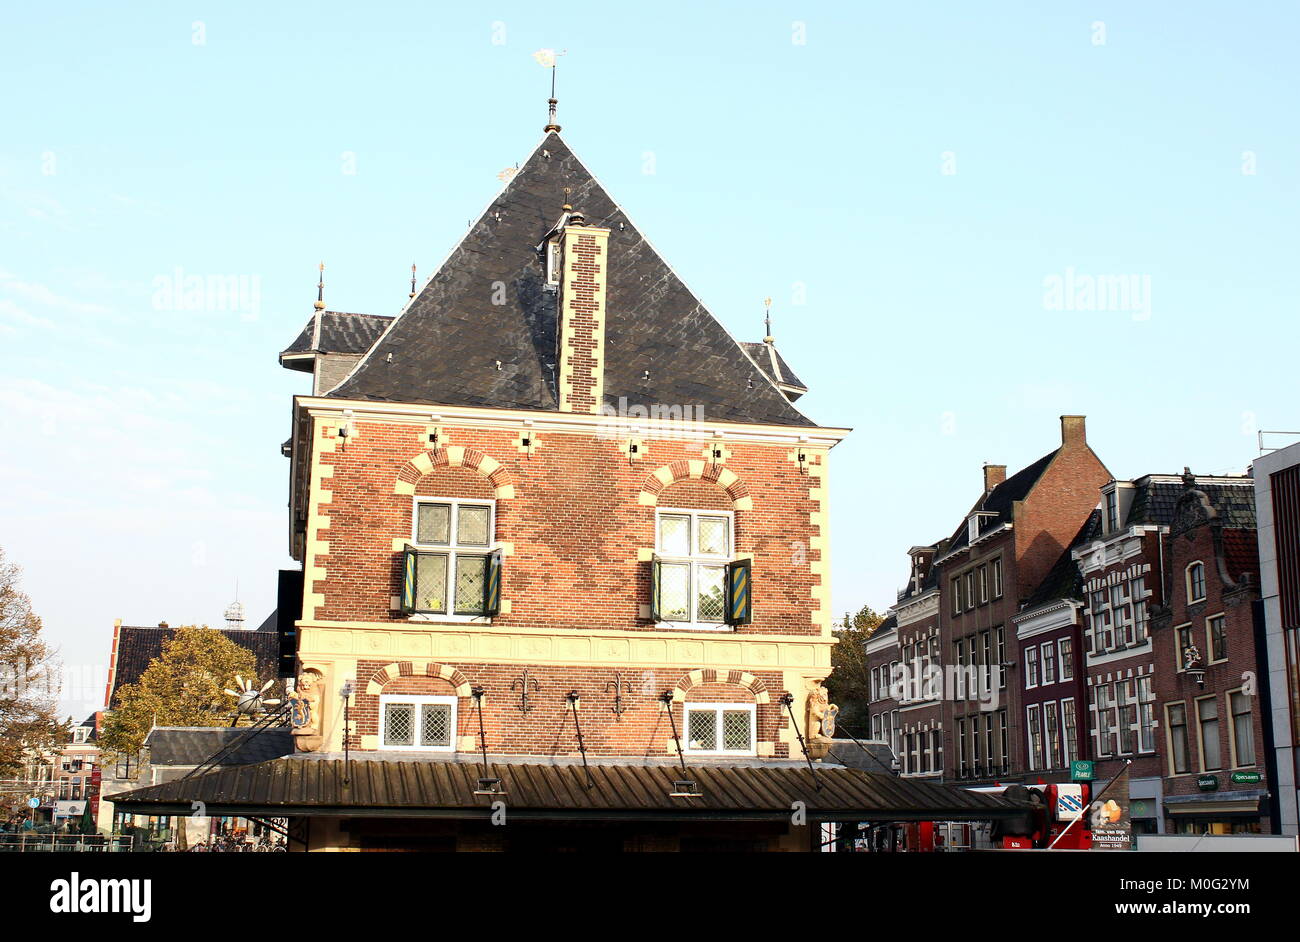 Late 16th century Waag building (weighing house) at Waagplein in central Leeuwarden, The Netherlands, a prominent landmark Stock Photo